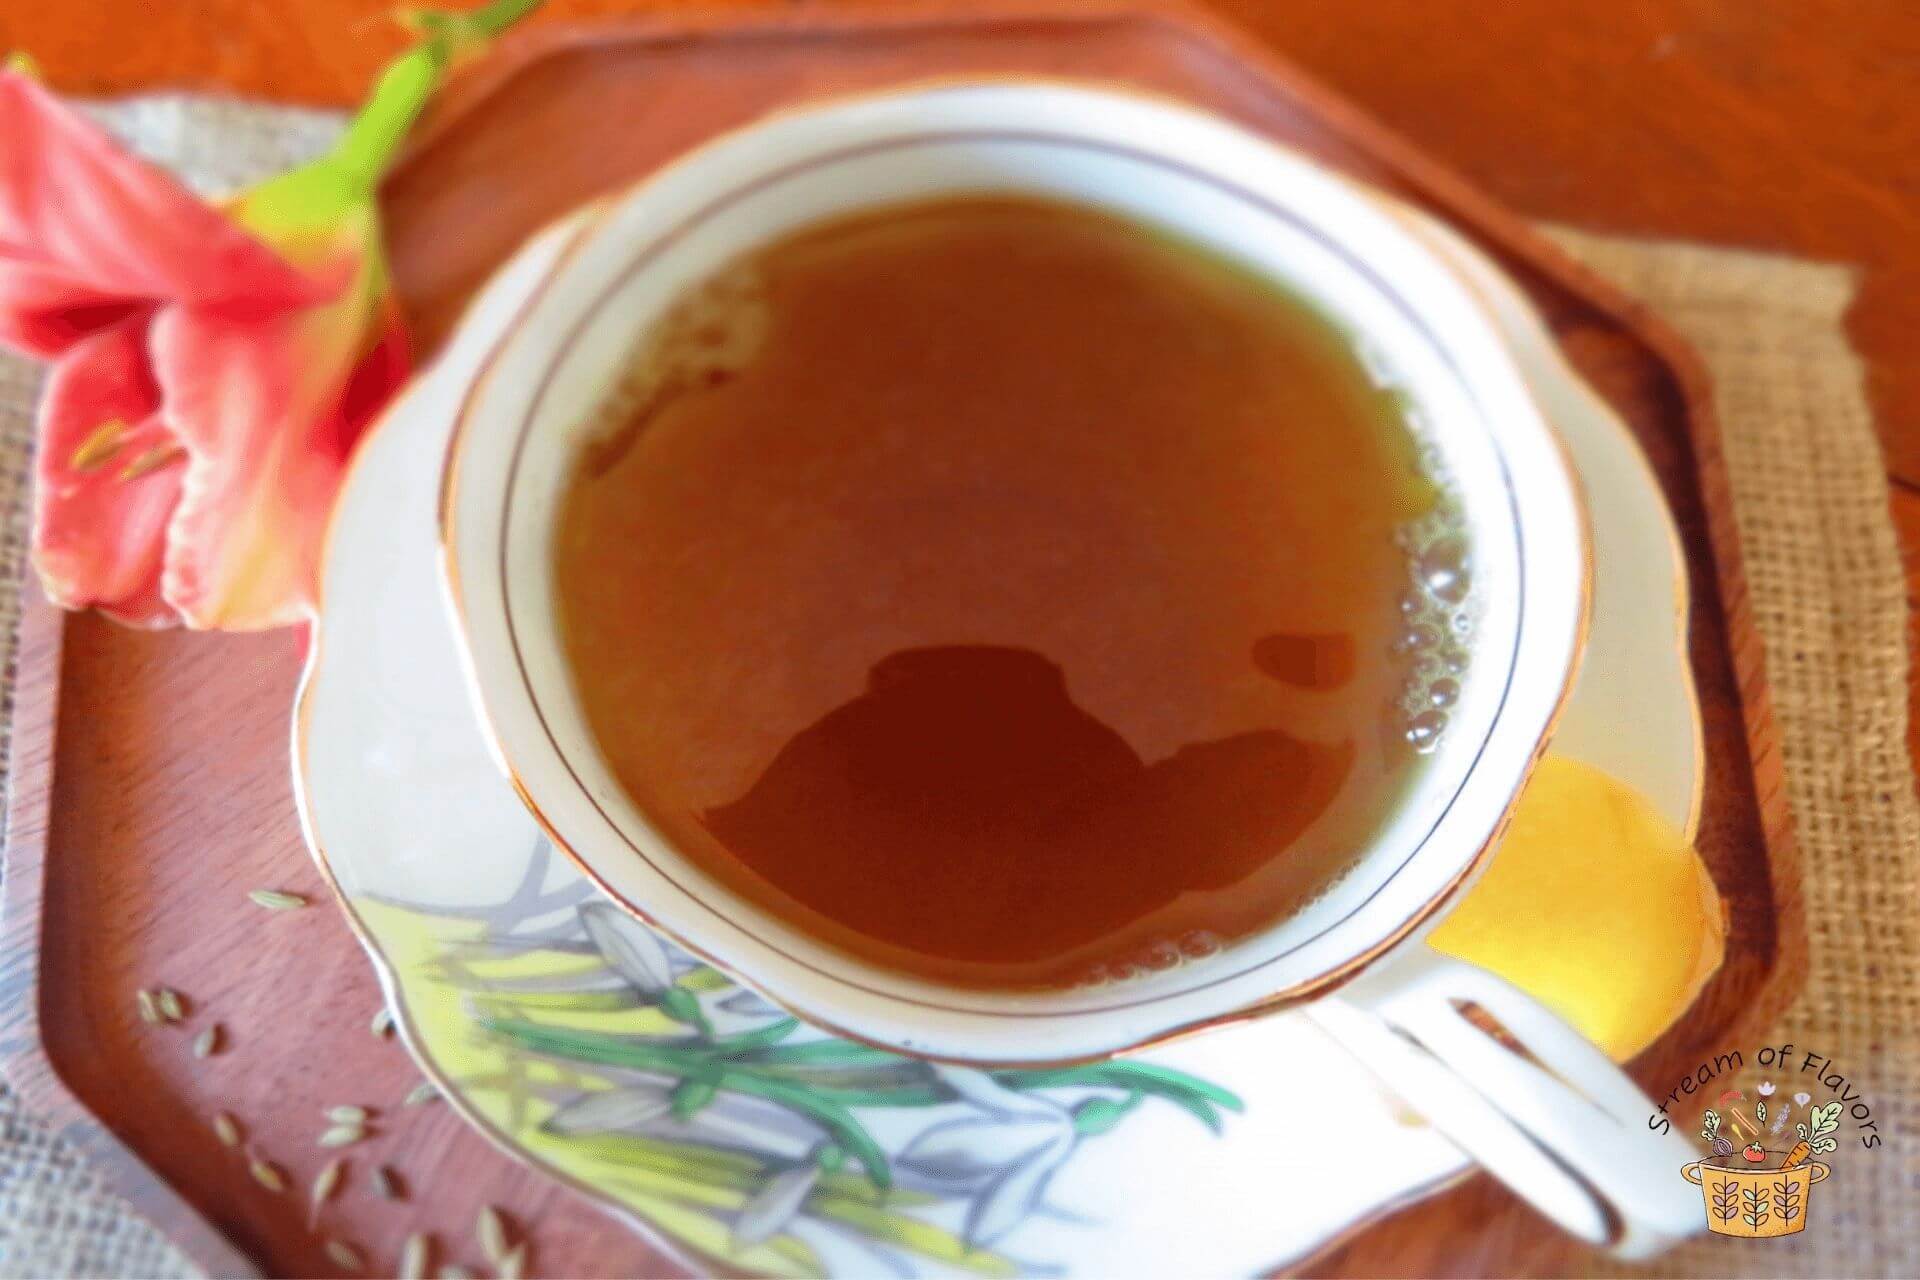 Fennel and Cumin Tea in a cup